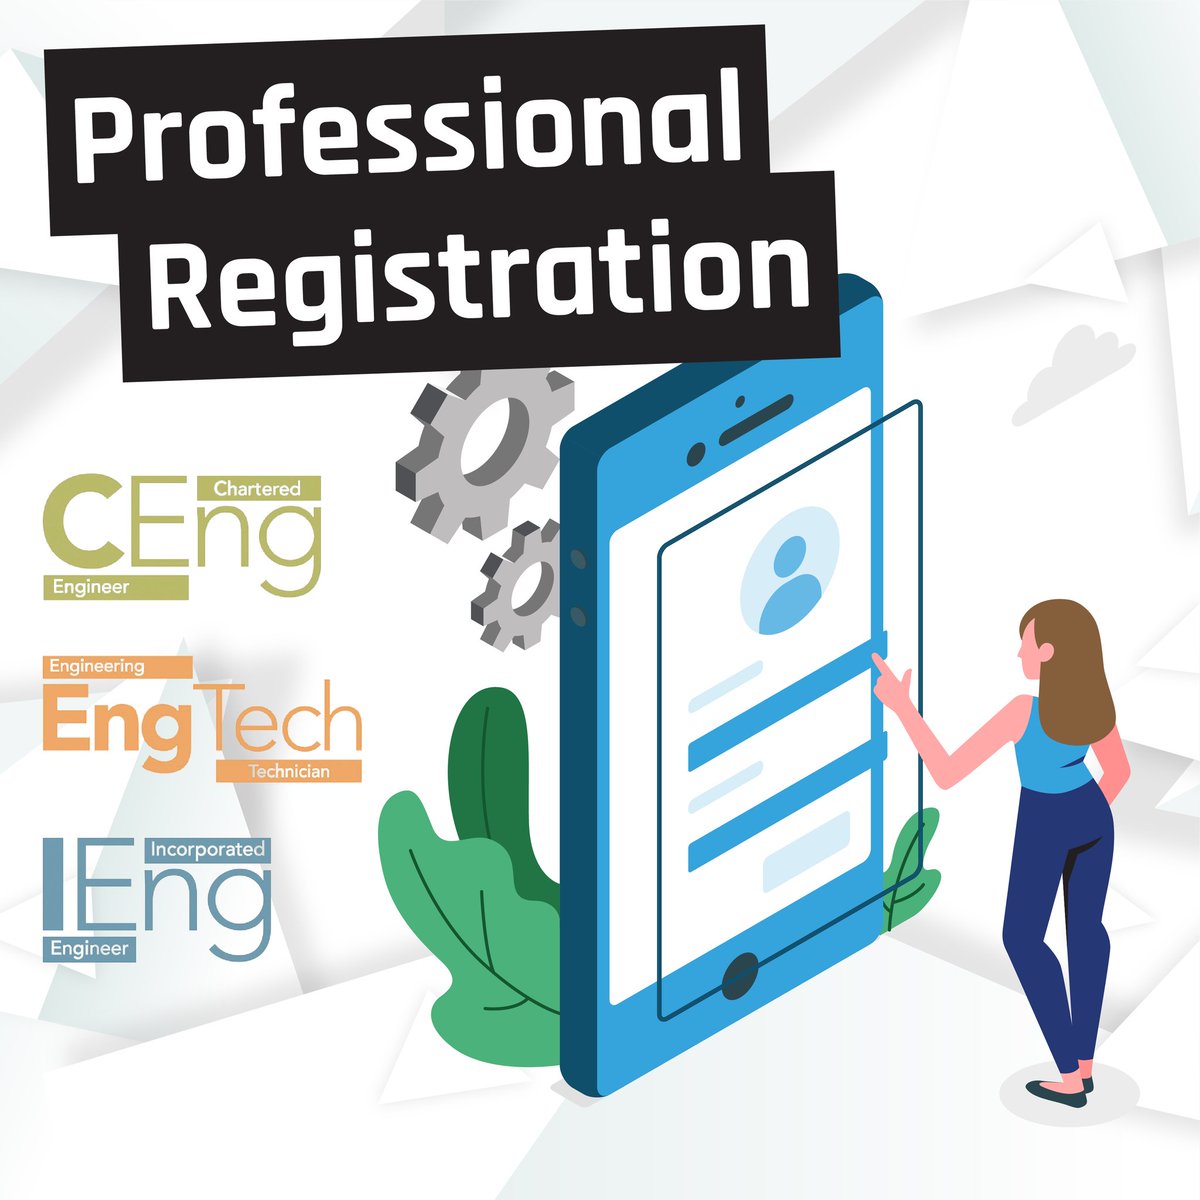 Interested in becoming Professionally Registered with the Engineering Council? Please join our Professional Registration Webinar to find out more information on applying to become CEng, IEng, and EngTech. Click here to register your interest -bit.ly/42WobEt